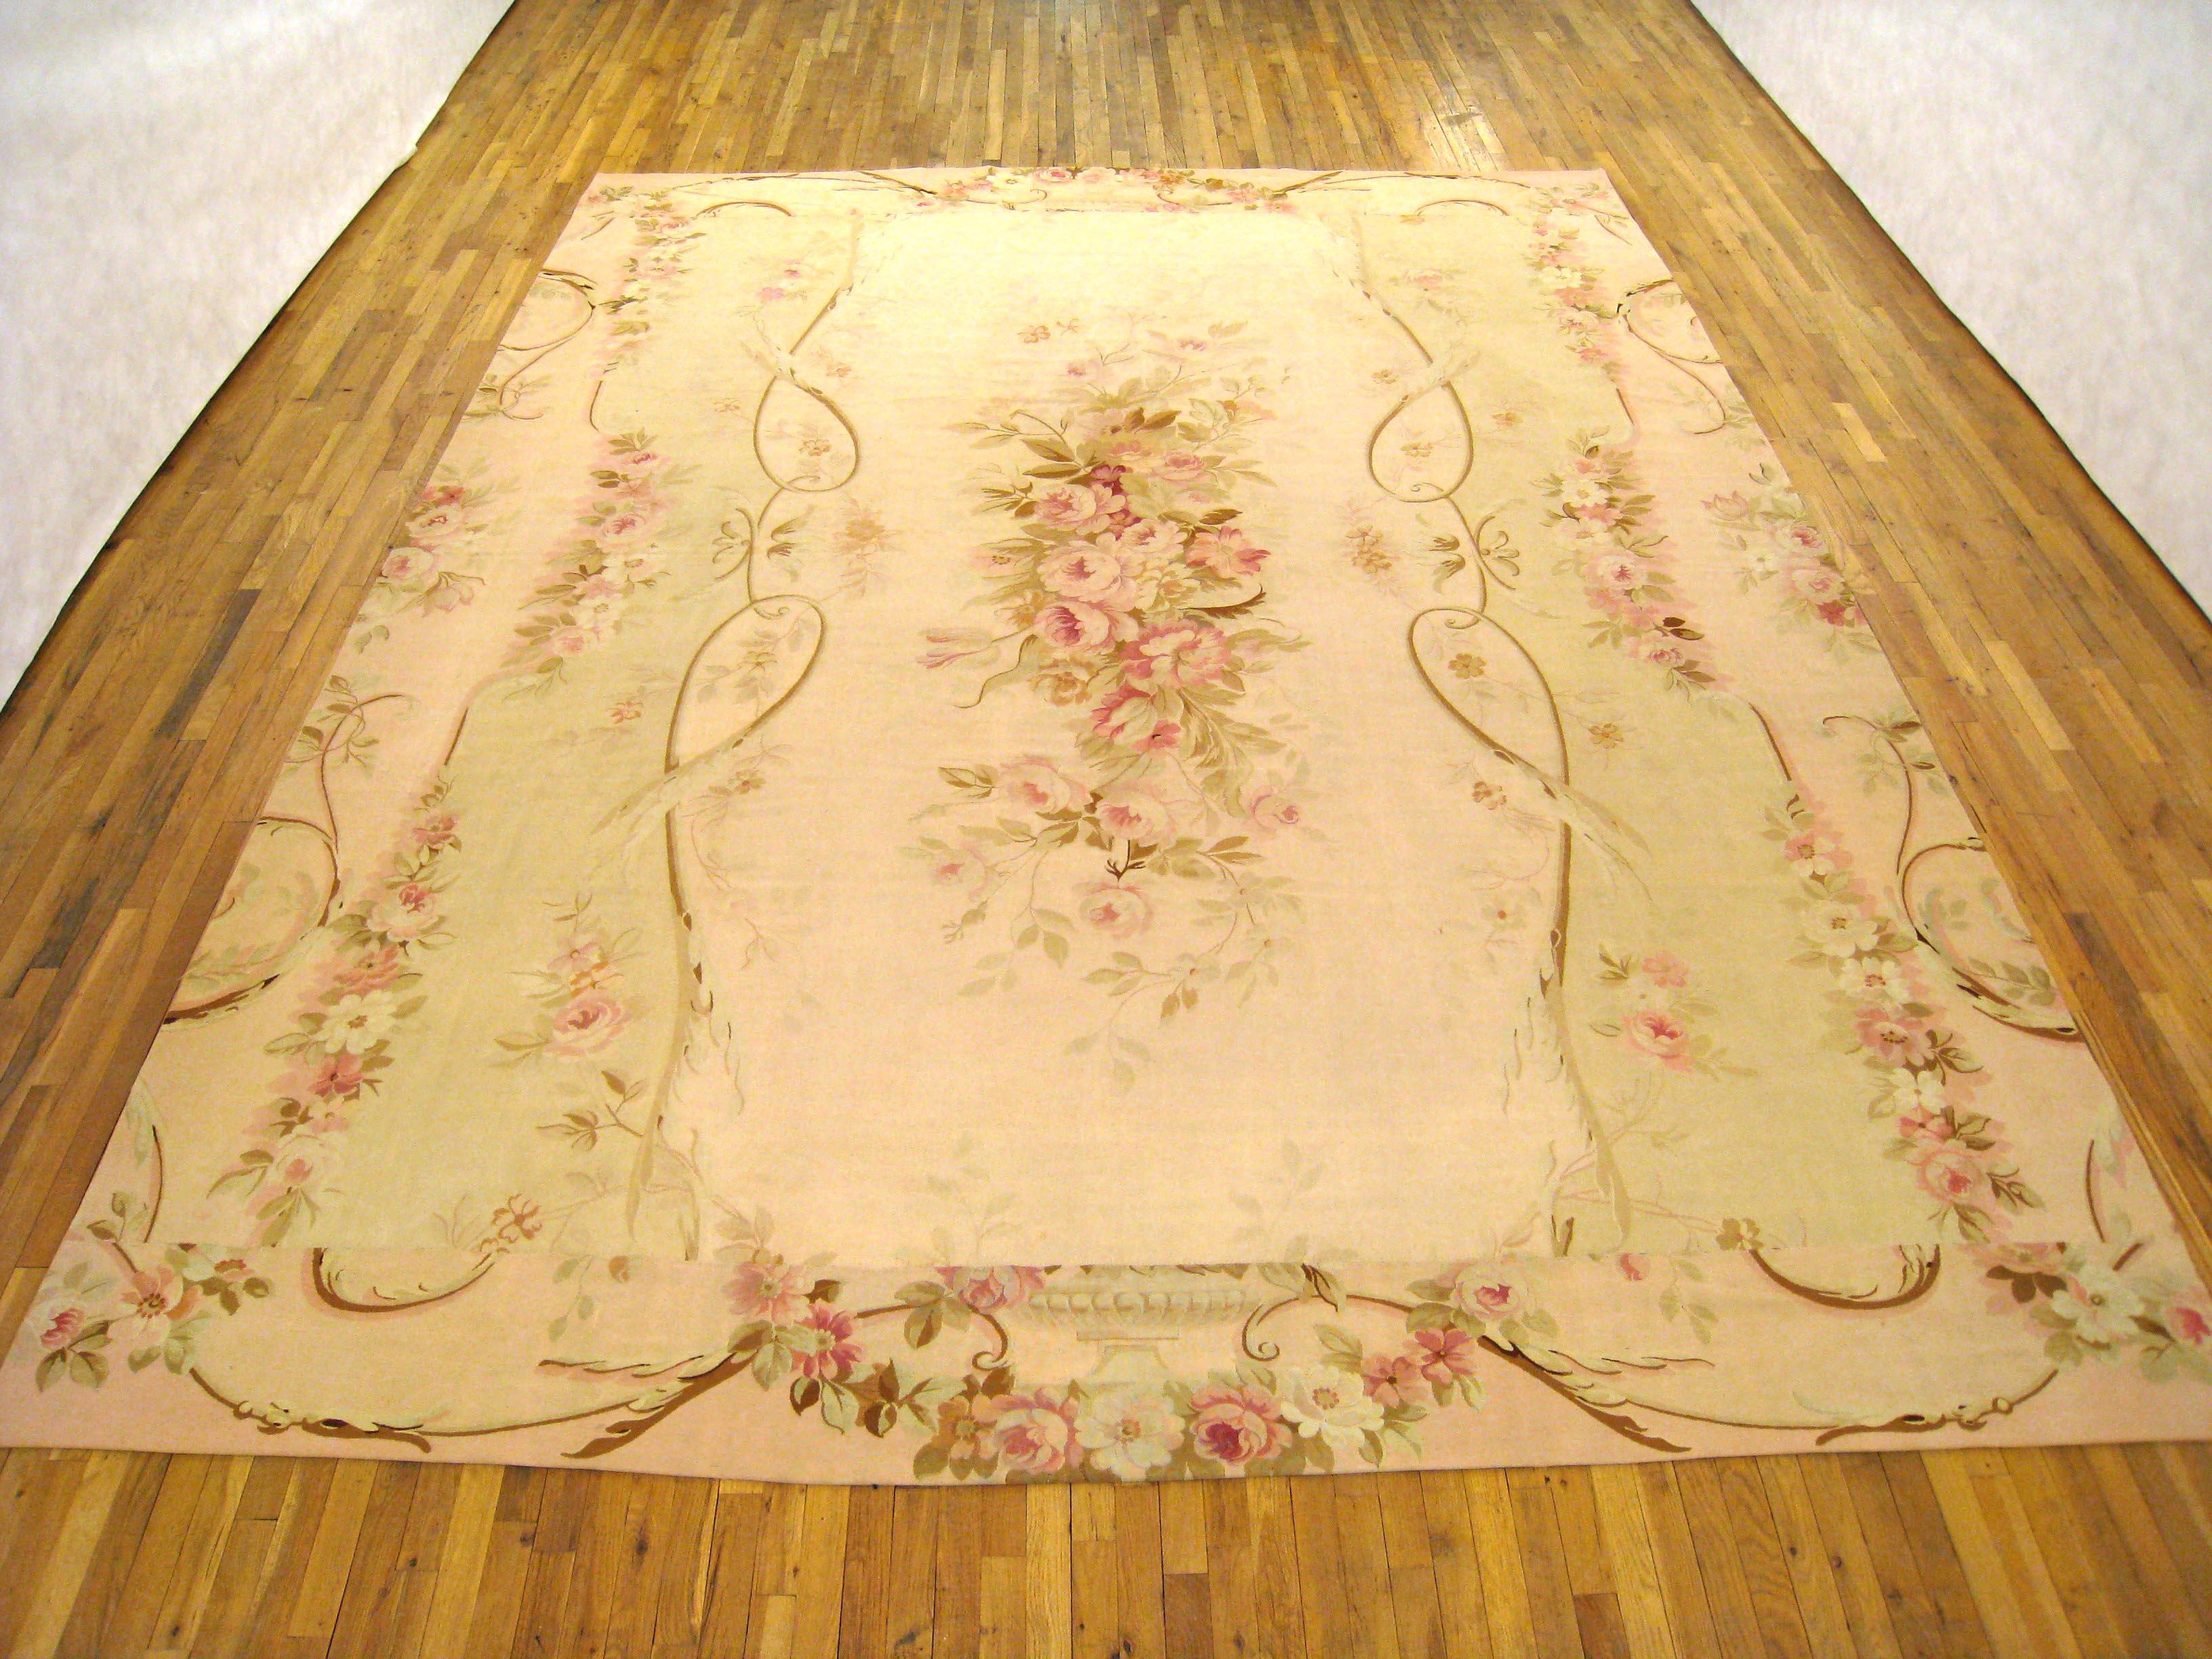 An antique French Aubusson carpet, size 14'0 x 10'9, circa 1890. This fine Louis Philippe era flat-woven French wool carpet features an elegant floral medallion at center, and a unique arrangement of outer borders, which reciprocate the colors and